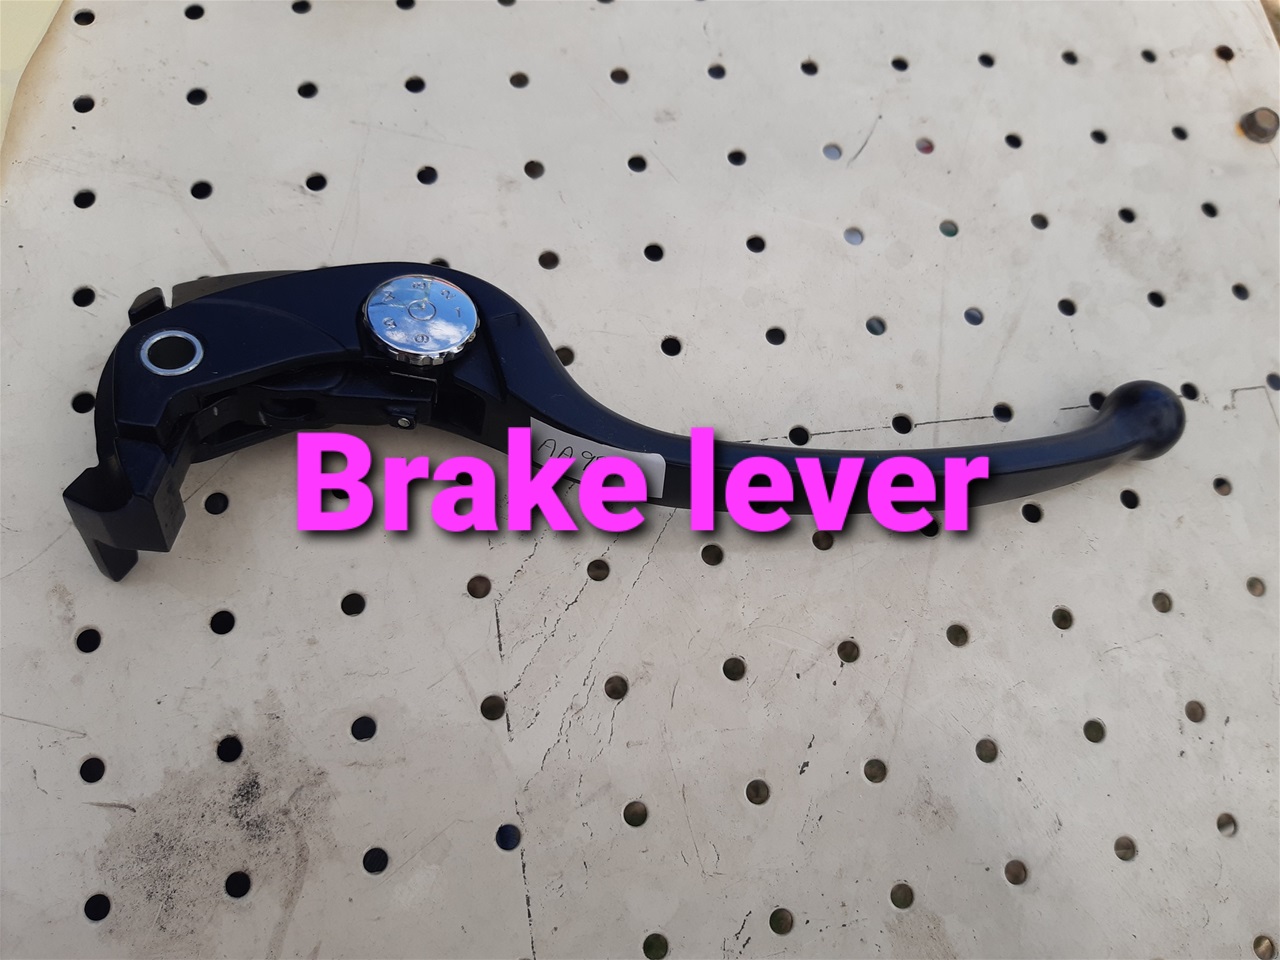 Brake & clutch lever and spares